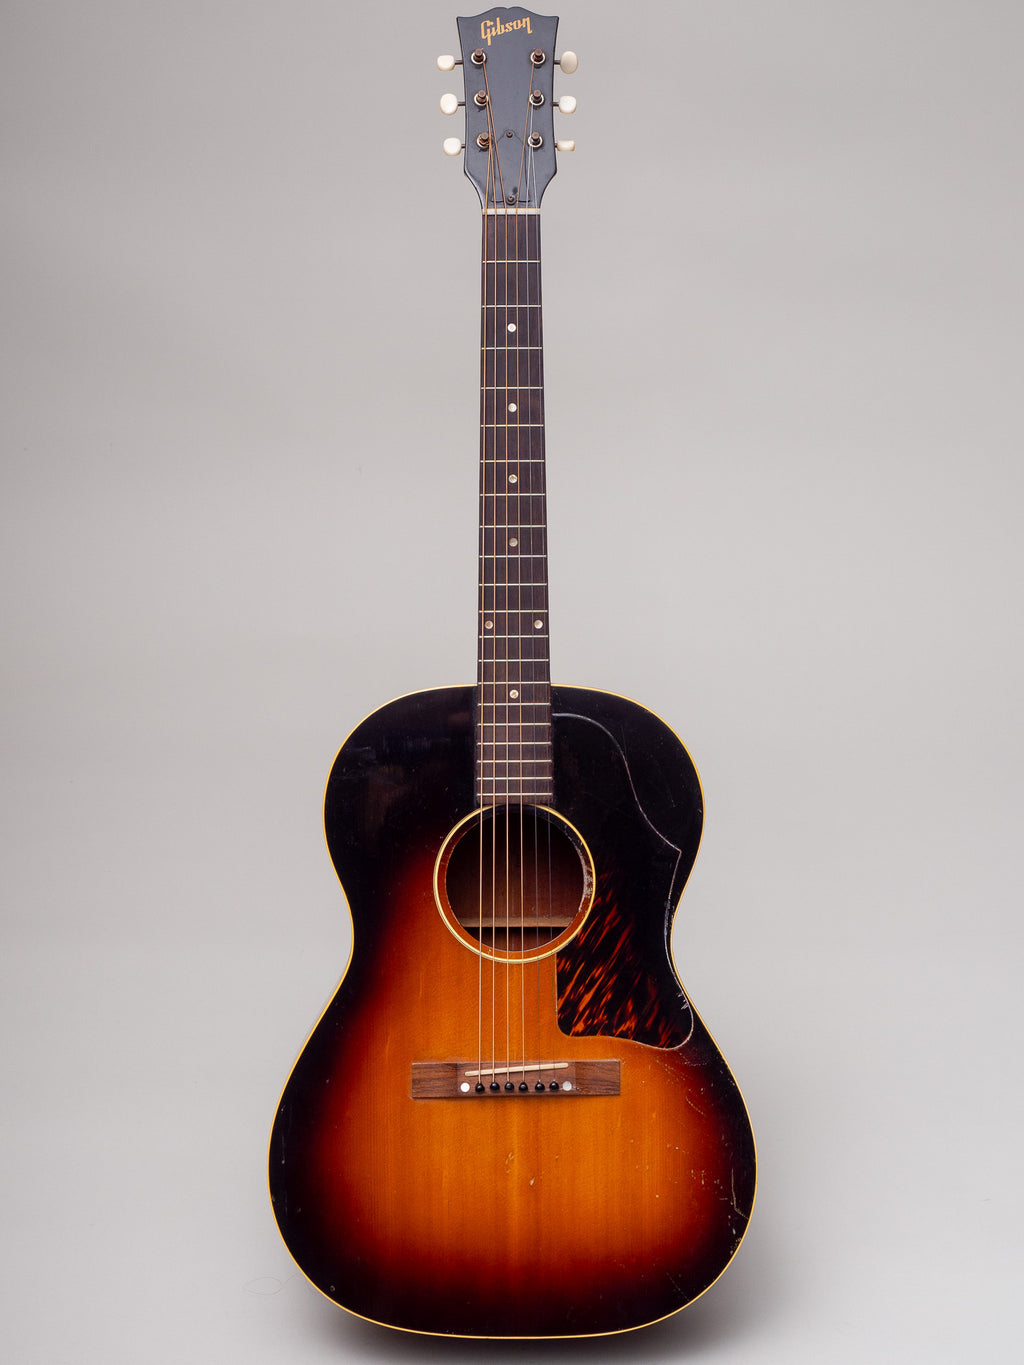 1957 Gibson LG-1 Full Acoustic Guitar front